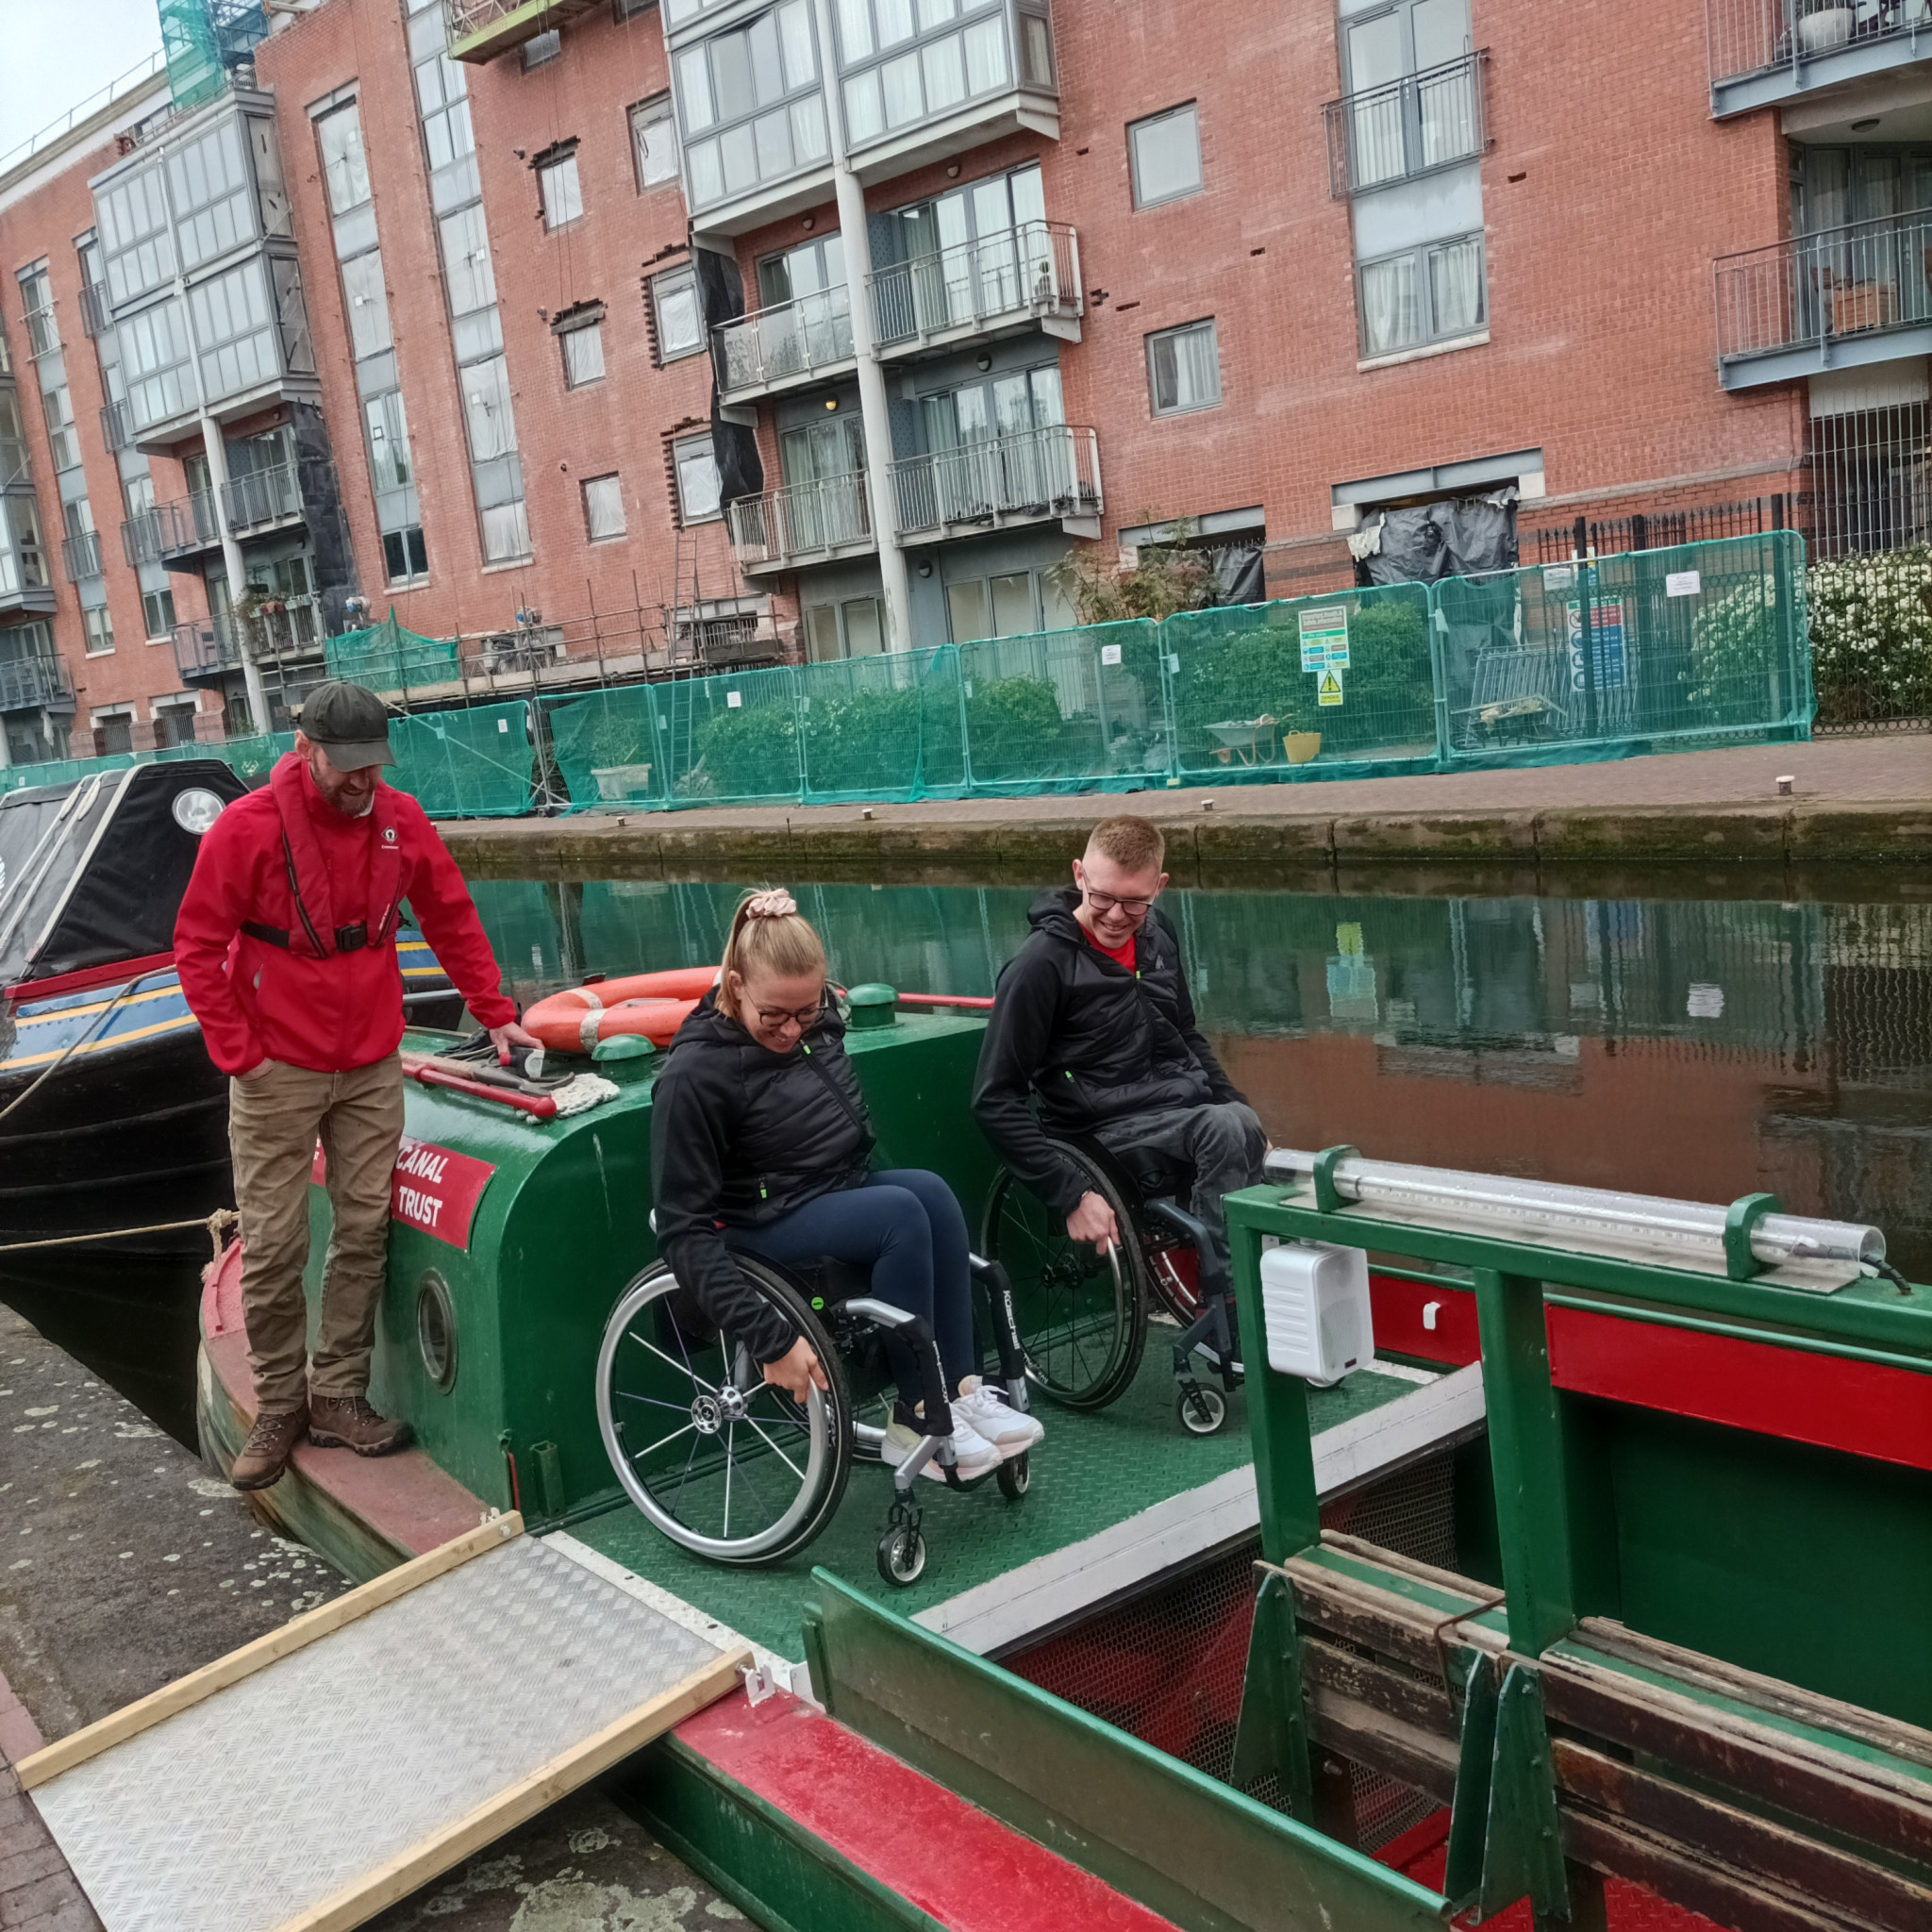 Hannah Cockroft and Nathan Maguire inspected one of Birmingham's narrowboats today ©ITG